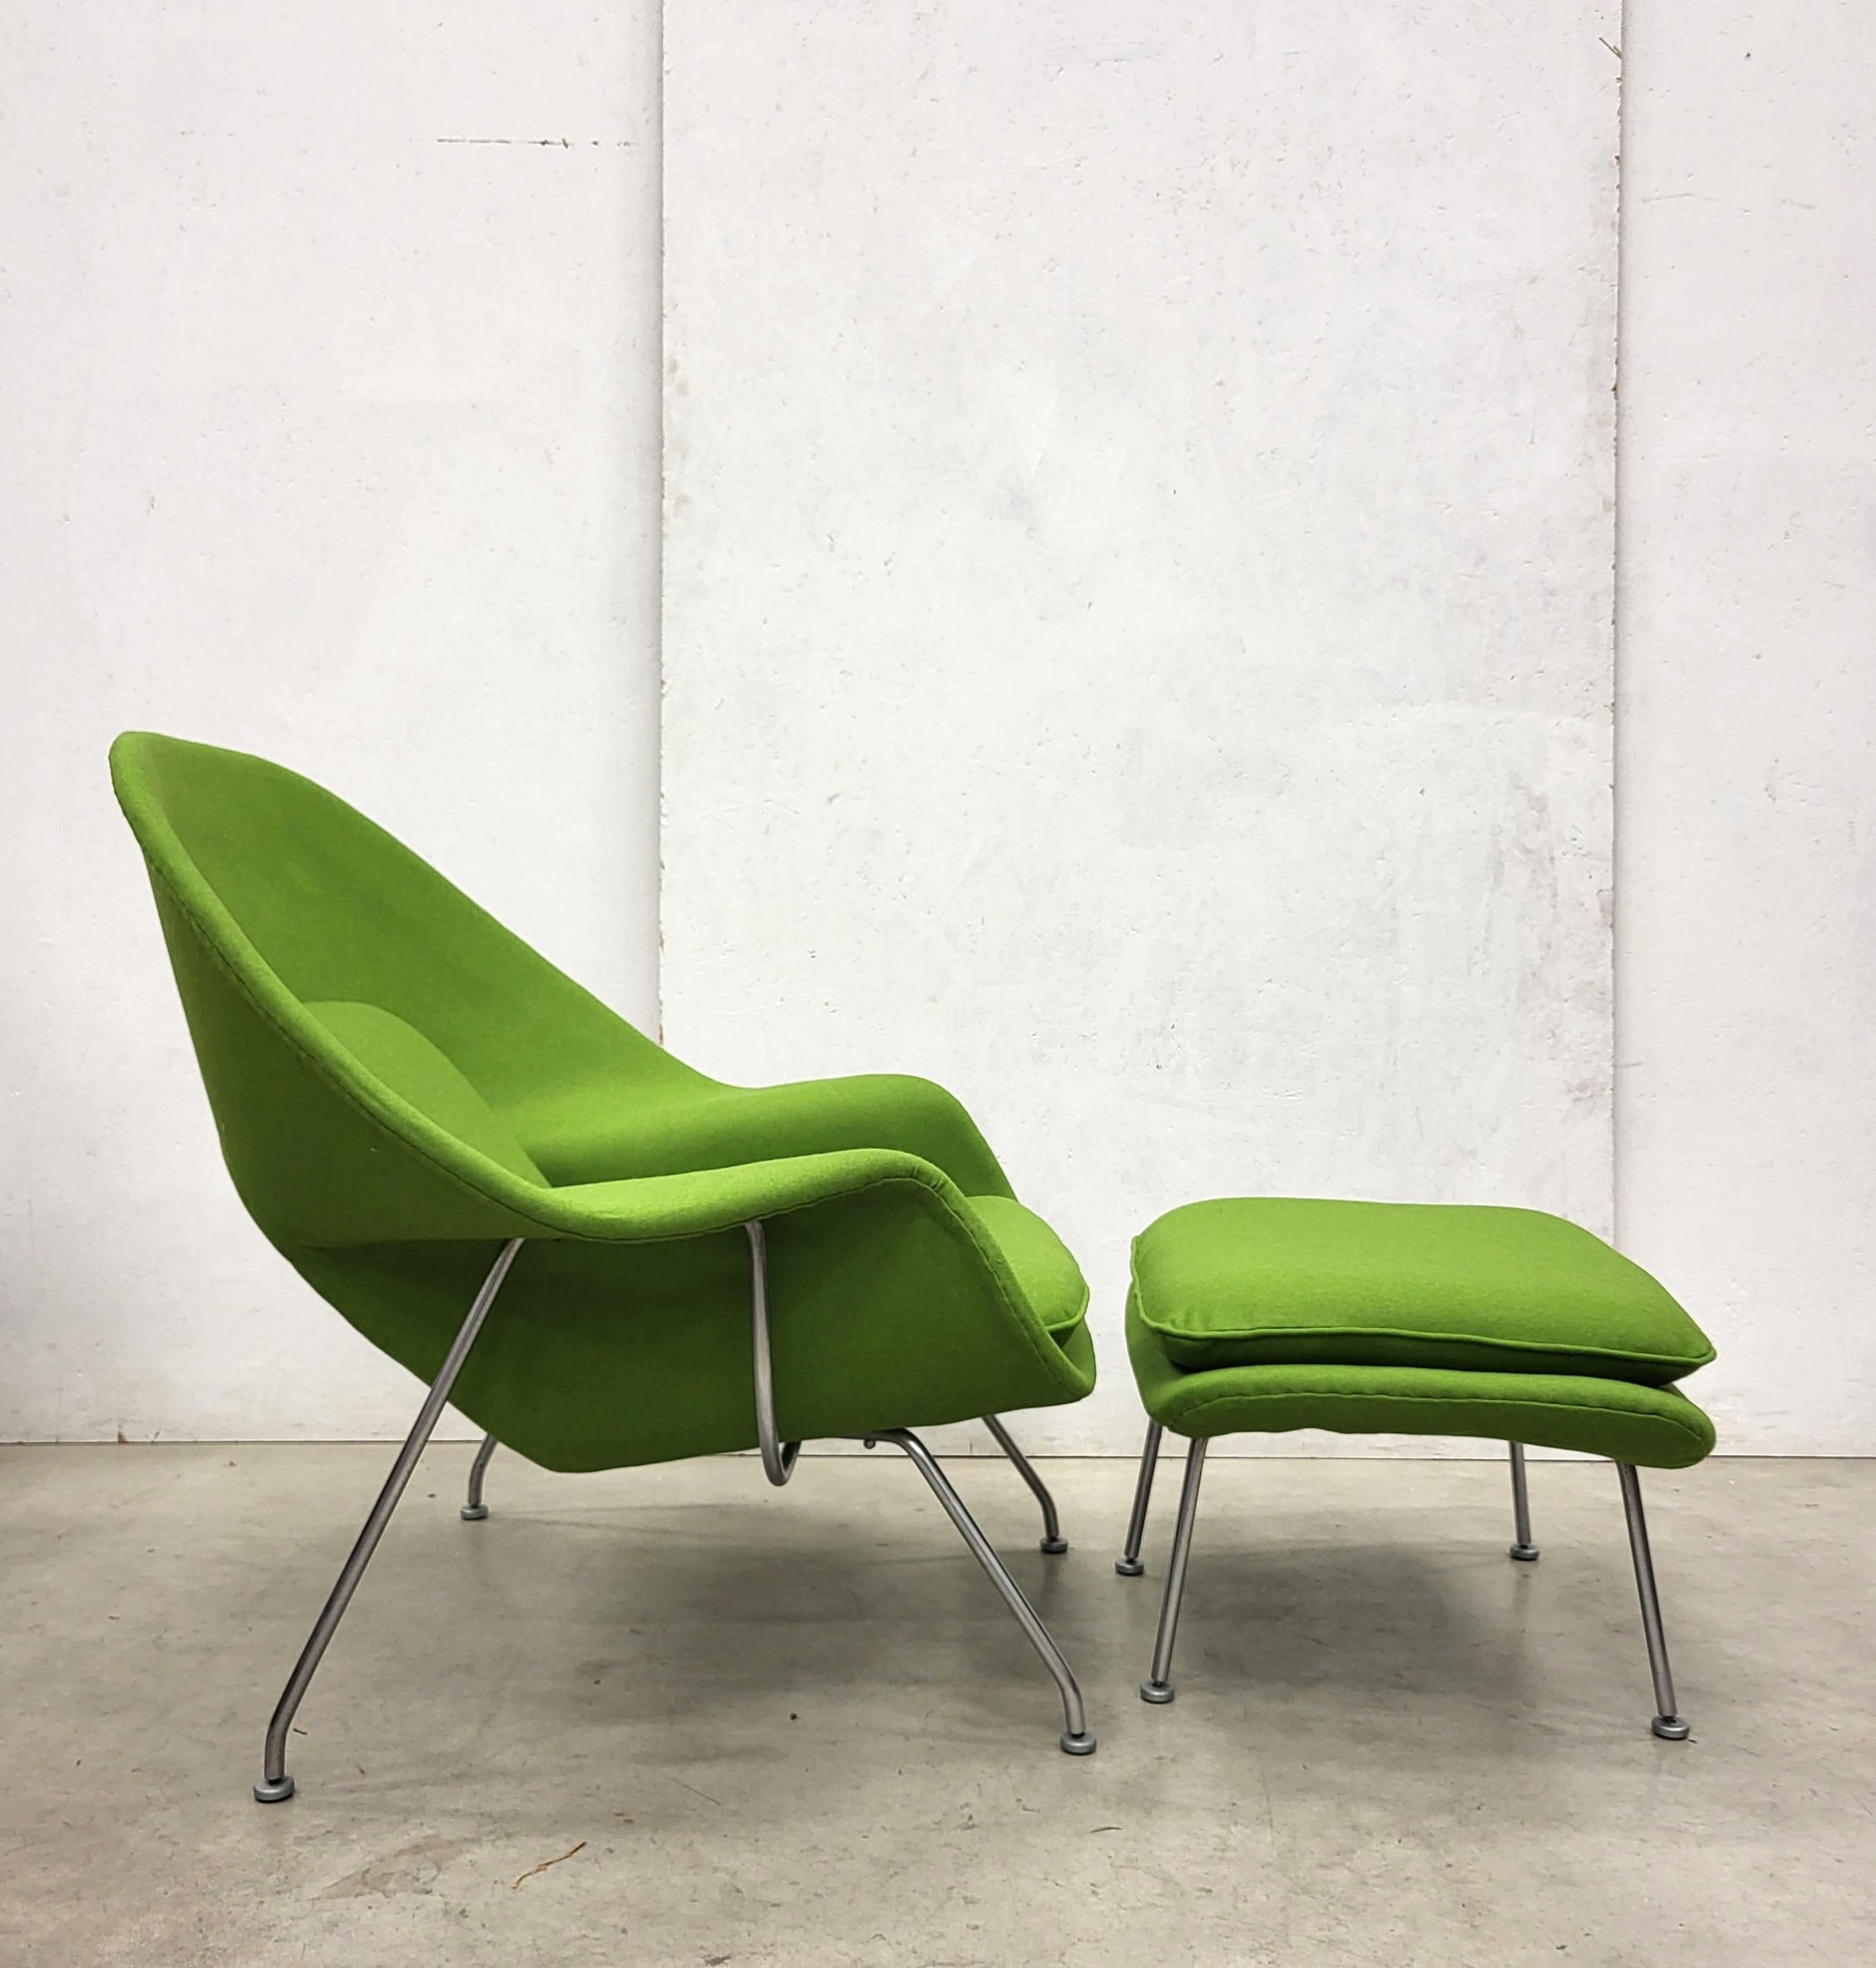 American Woodgreen Womb Chair & Ottoman by Eero Saarinen for Knoll, 1960s For Sale